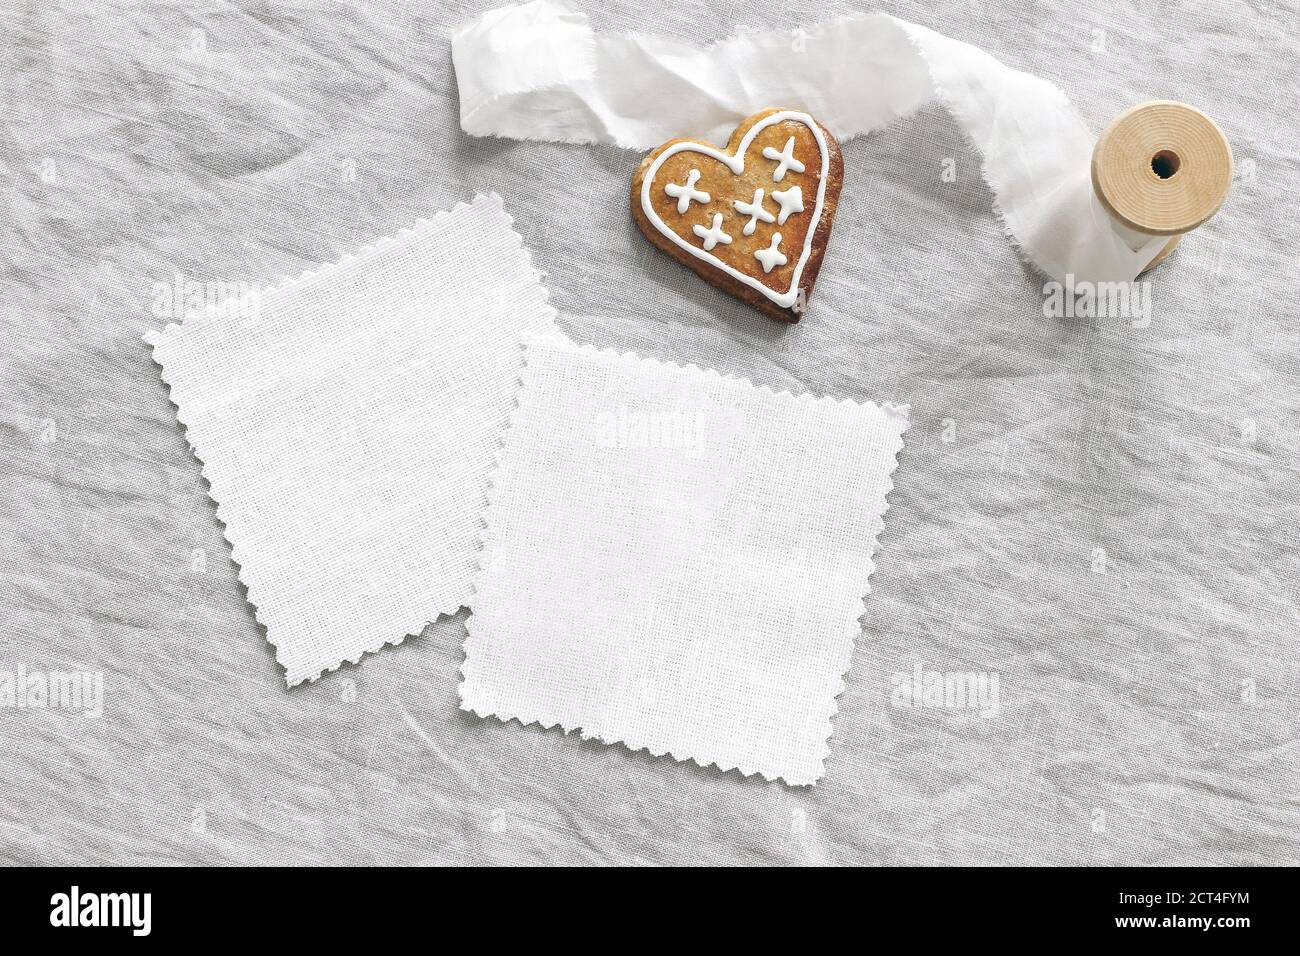 Download Christmas Textile Mockup Scene White Cotton Fabrics Swatches On Linen Table Cloth Background Gingerbread Heart Cookie Decorative Sugar Frosting And Stock Photo Alamy